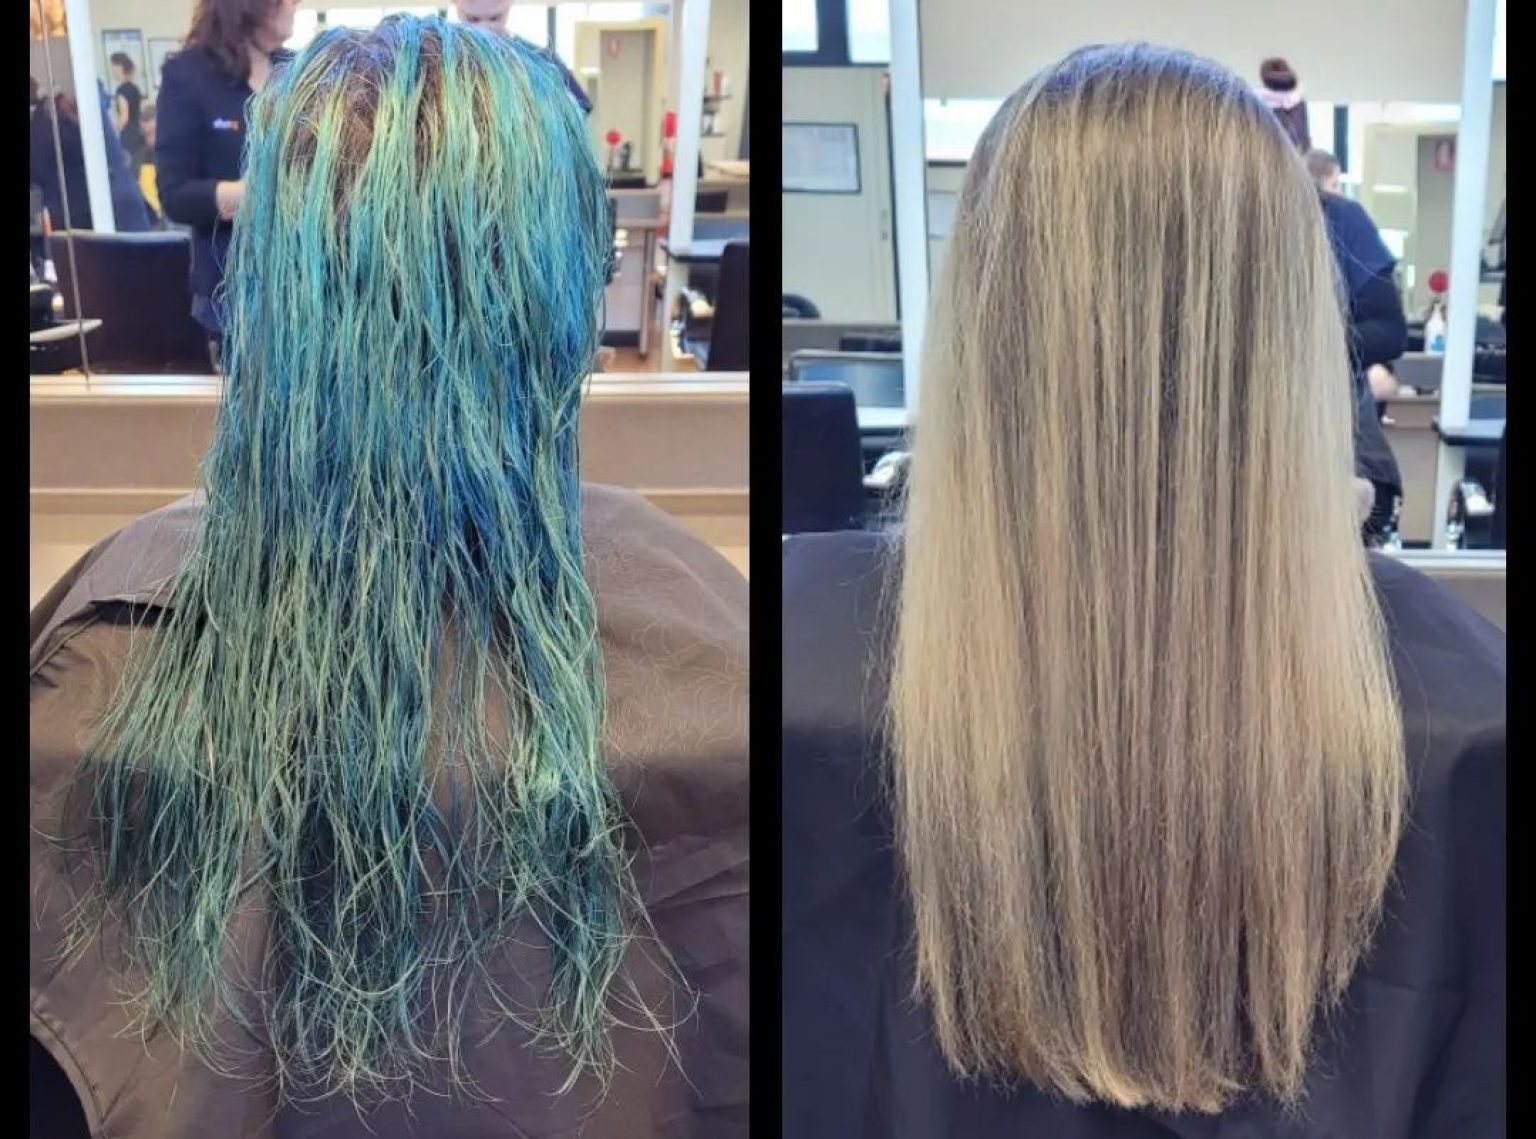 How to Remove Blue Hair Dye from Kids' Hair - wide 11